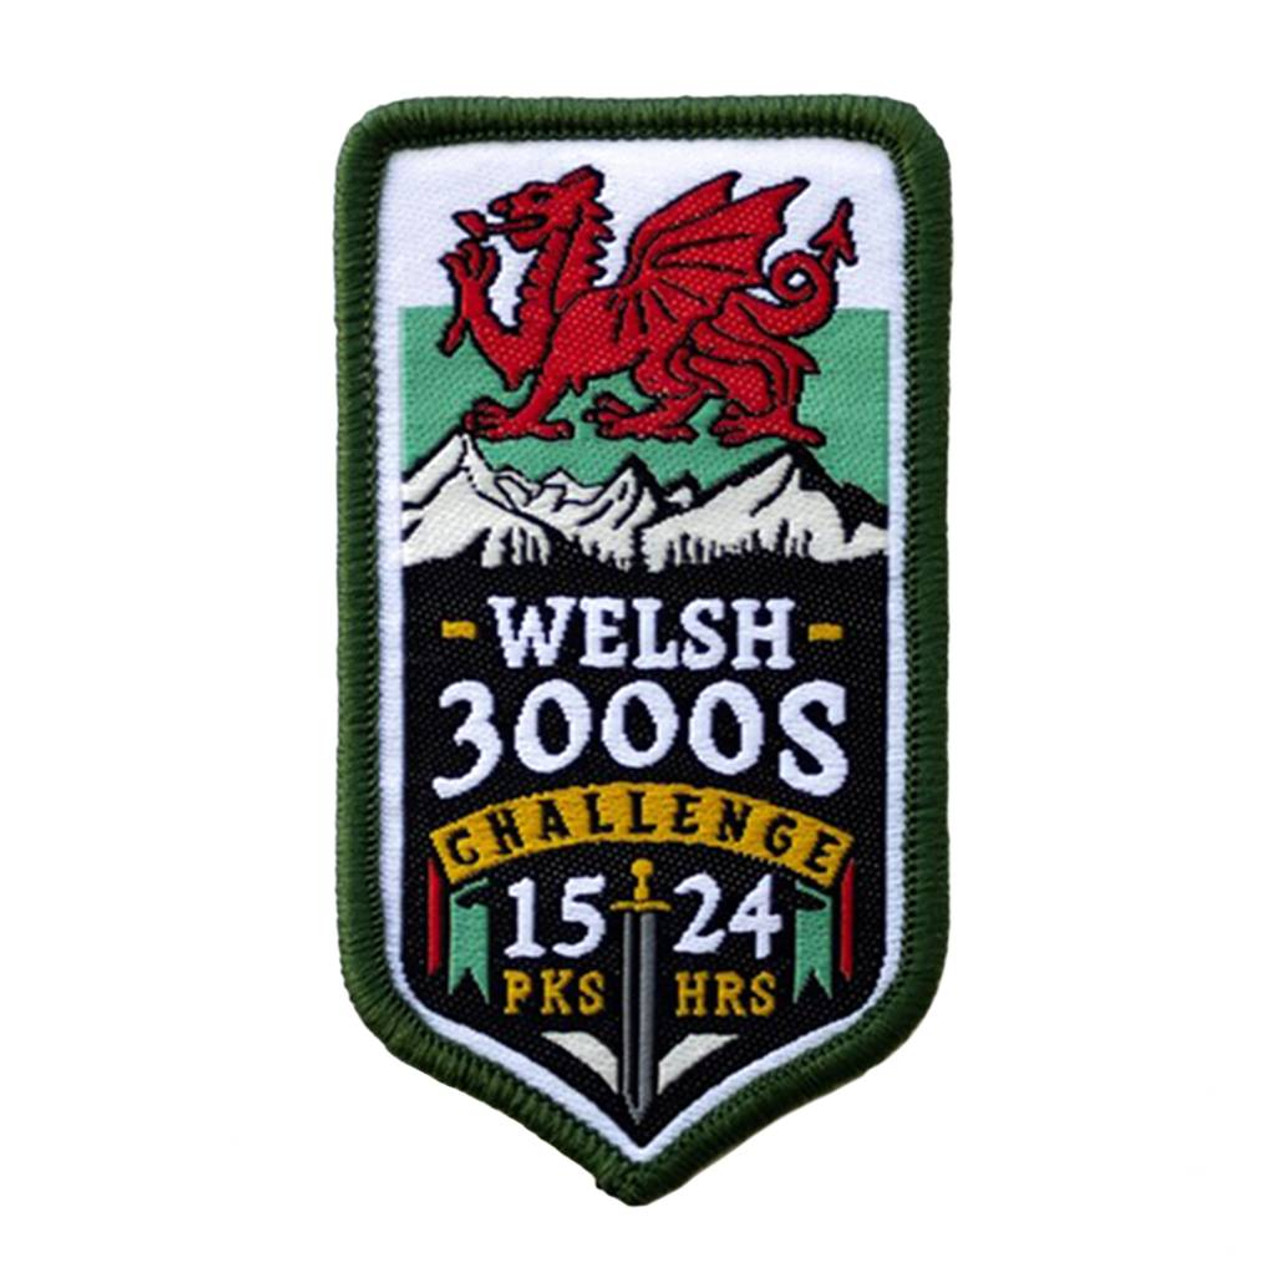 Welsh 3000s Challenge Challenge Patch